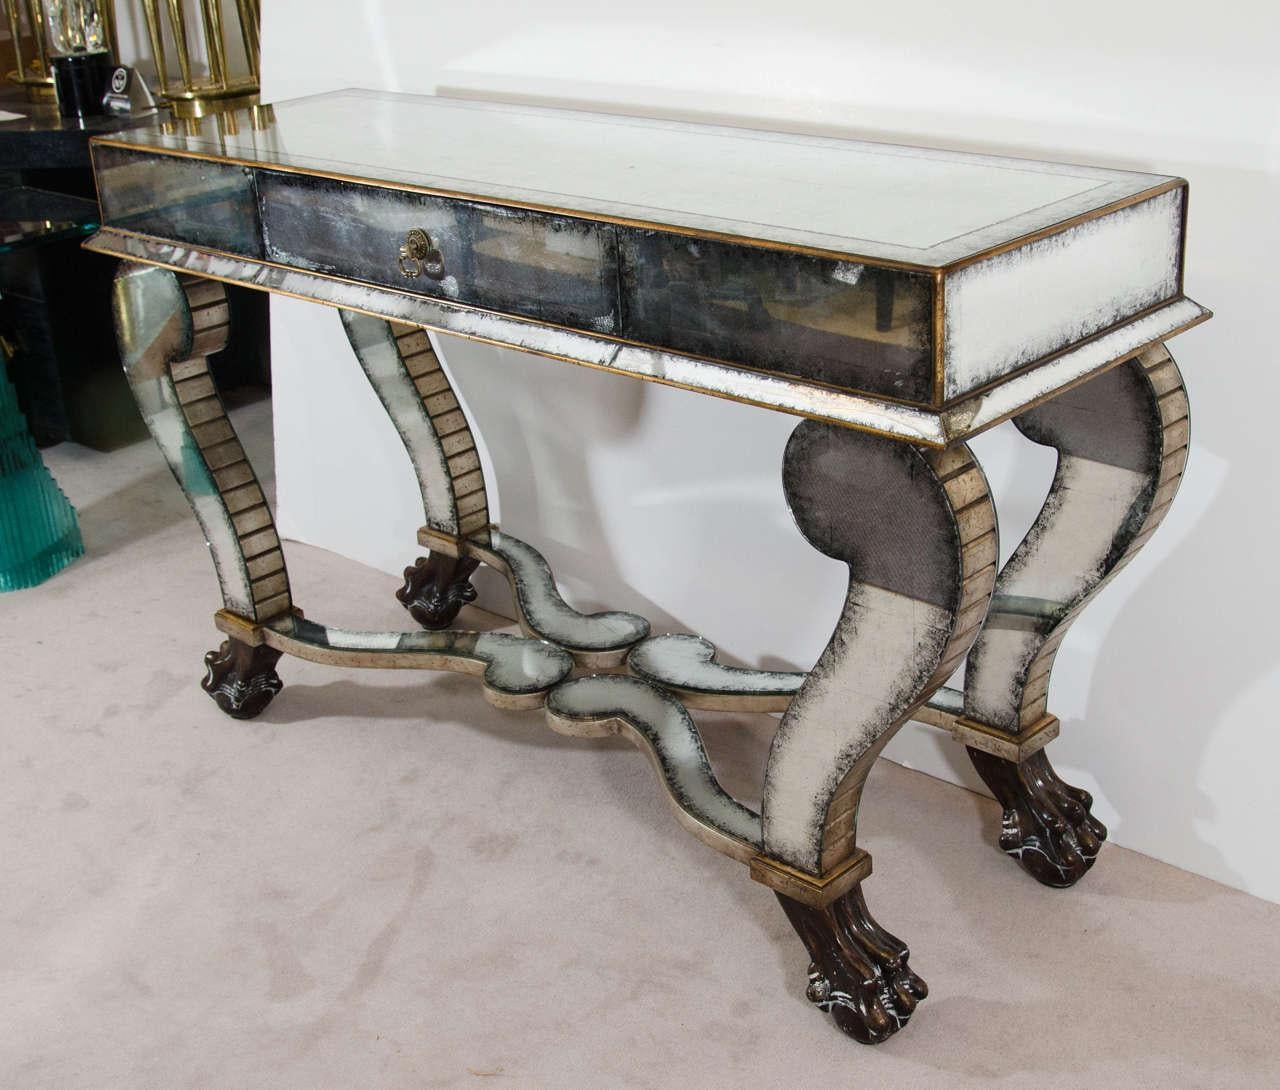 Neoclassical style console with central single drawer, covered in aged and distressed mirror panels framed by gilt metal borders. The four feet of the console have lion claws atop ball feet. The piece is in good vintage condition.